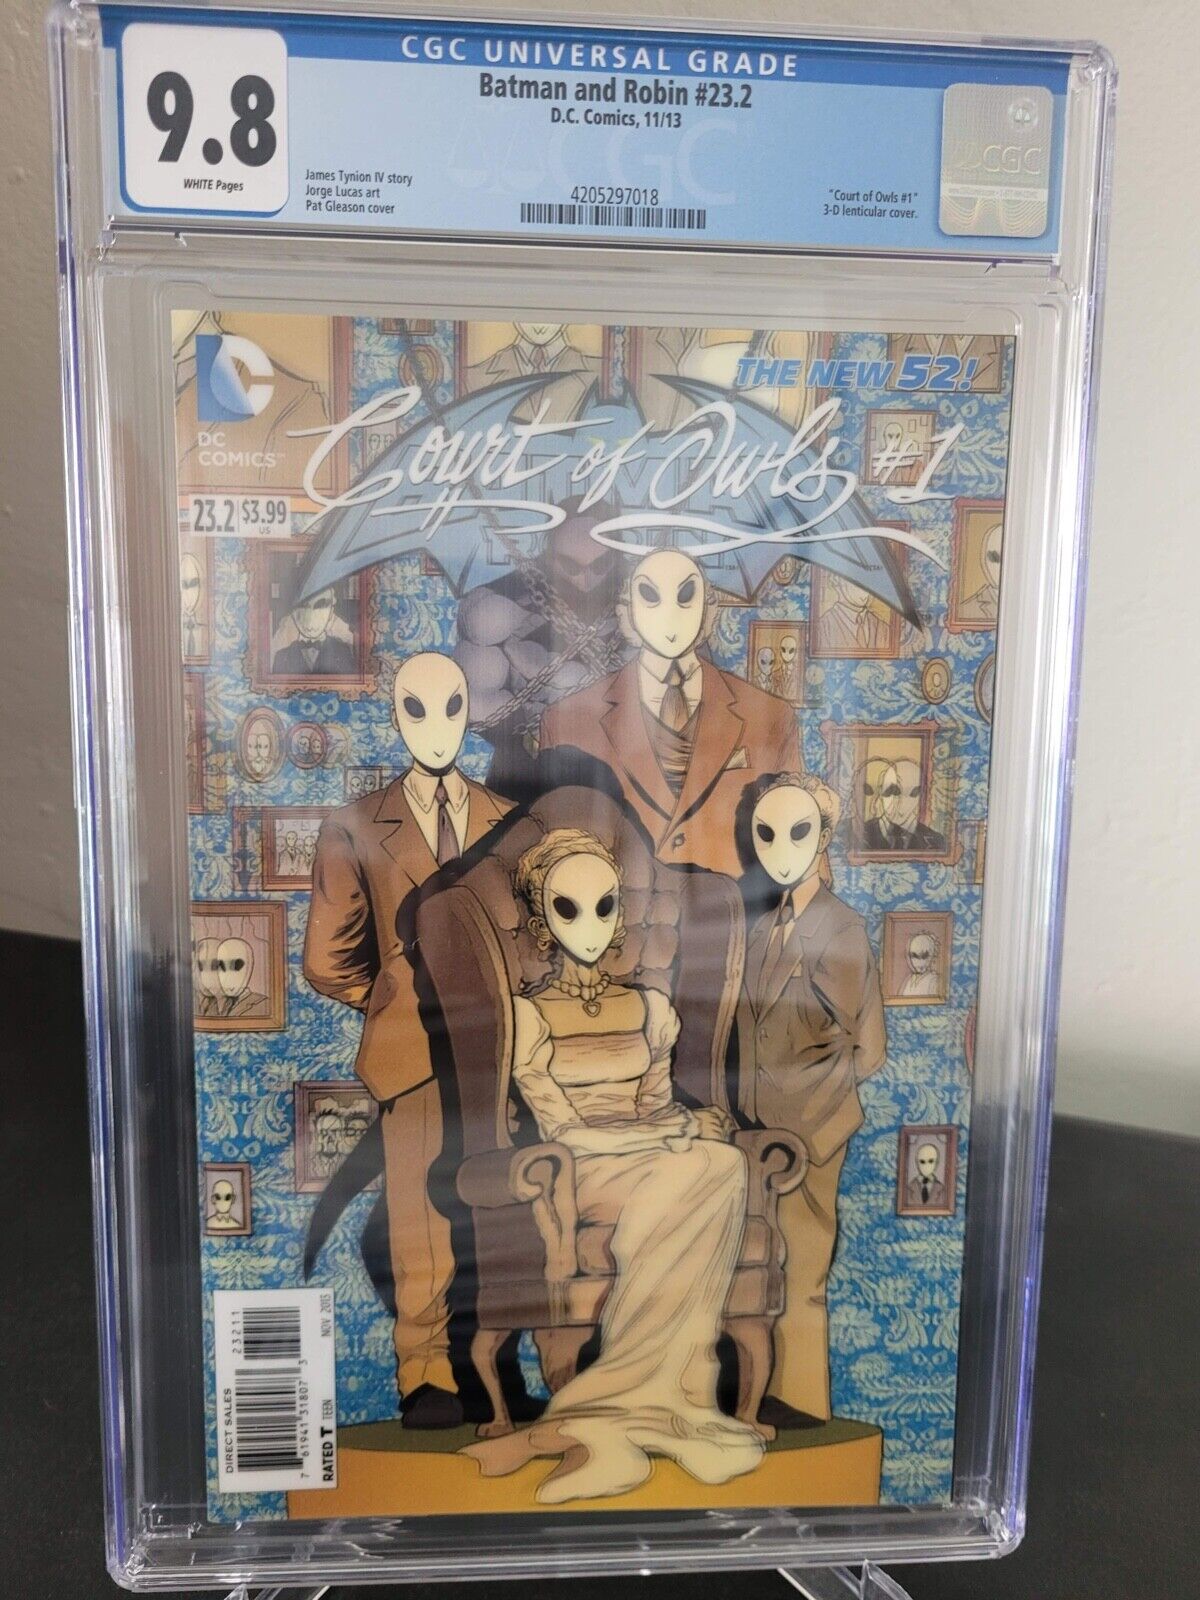 BATMAN AND ROBIN #23.2 CGC 9.8 GRADED DC COURT OF OWLS #1 LENTICULAR 3D COVER